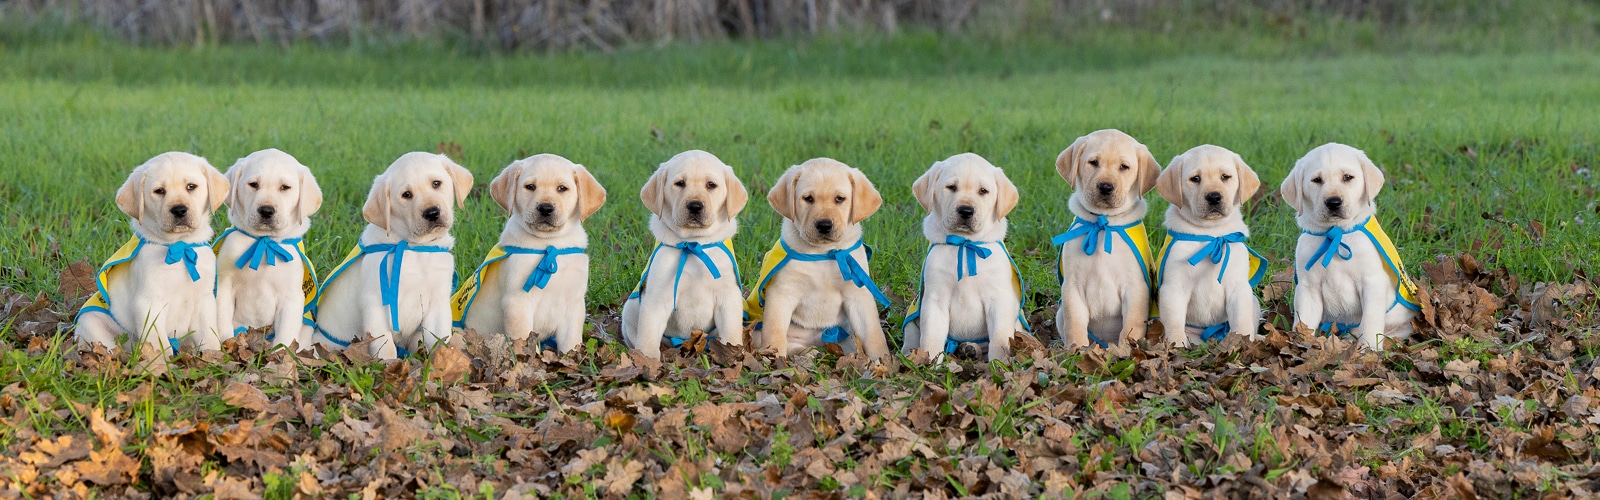 a row of yellow lab puppies in yellow puppy capes sitting in a field